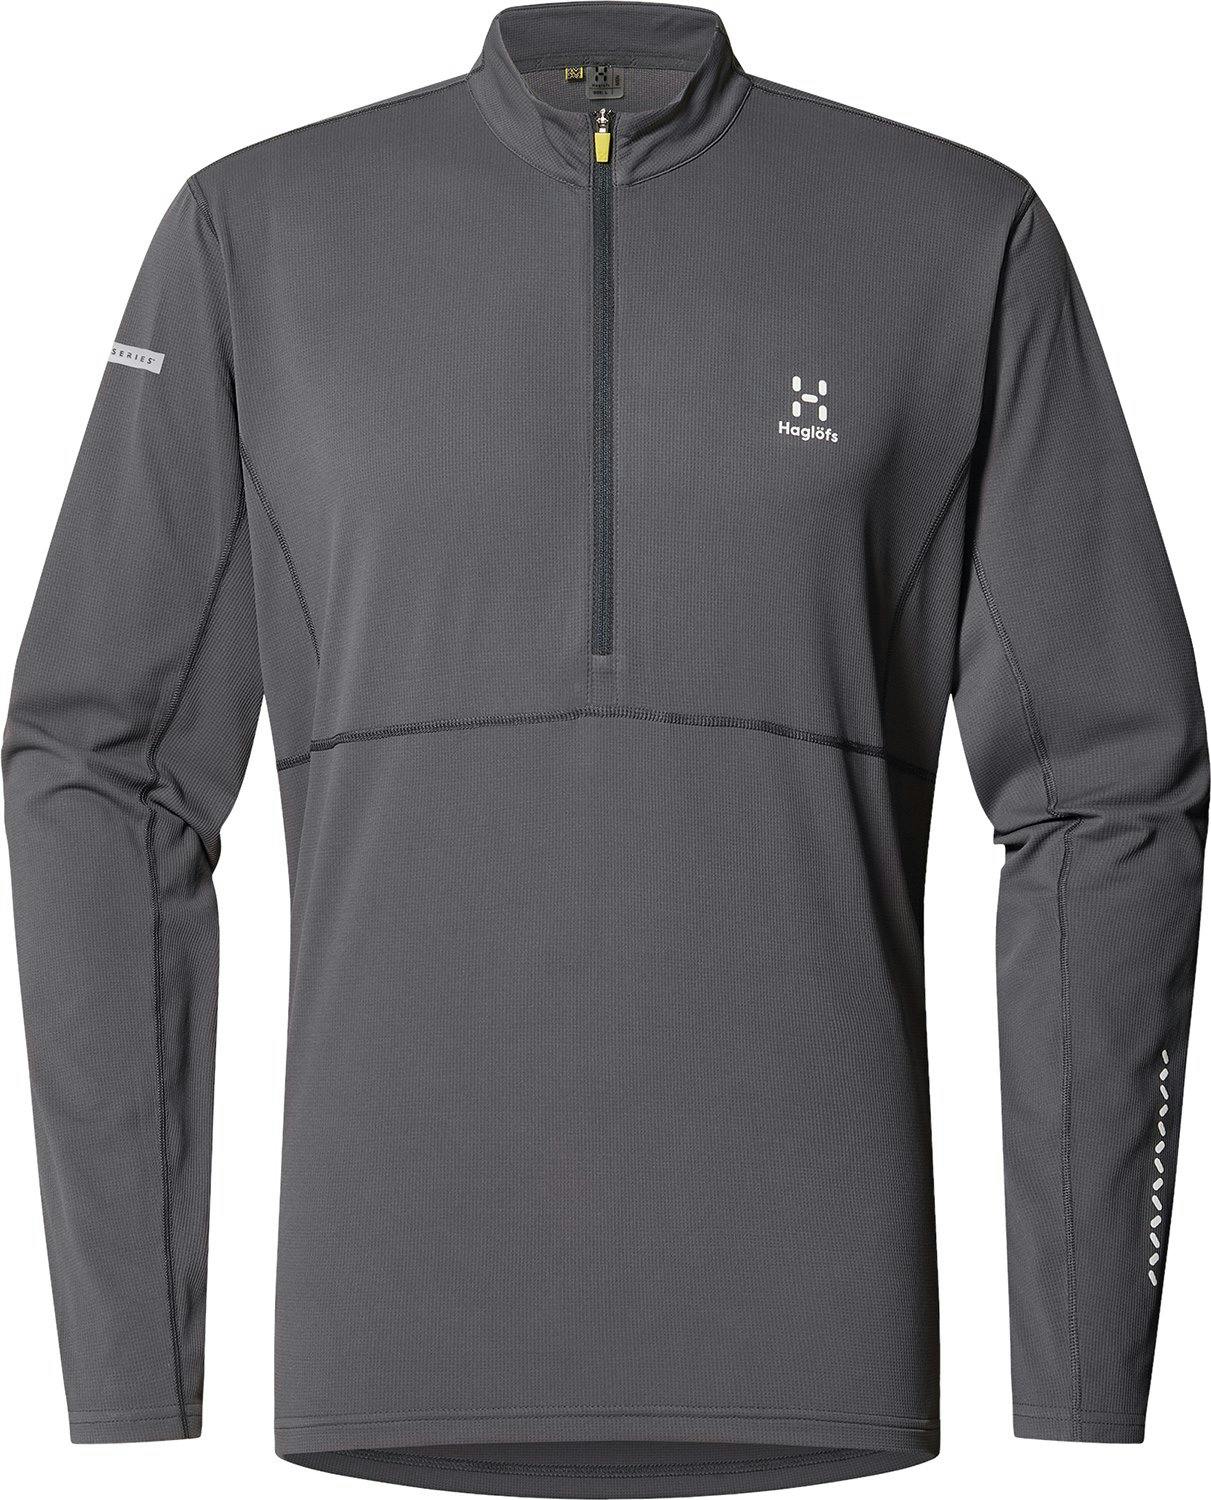 Product image for L.I.M Tempo Trail Half Zip Midlayer Top - Men's